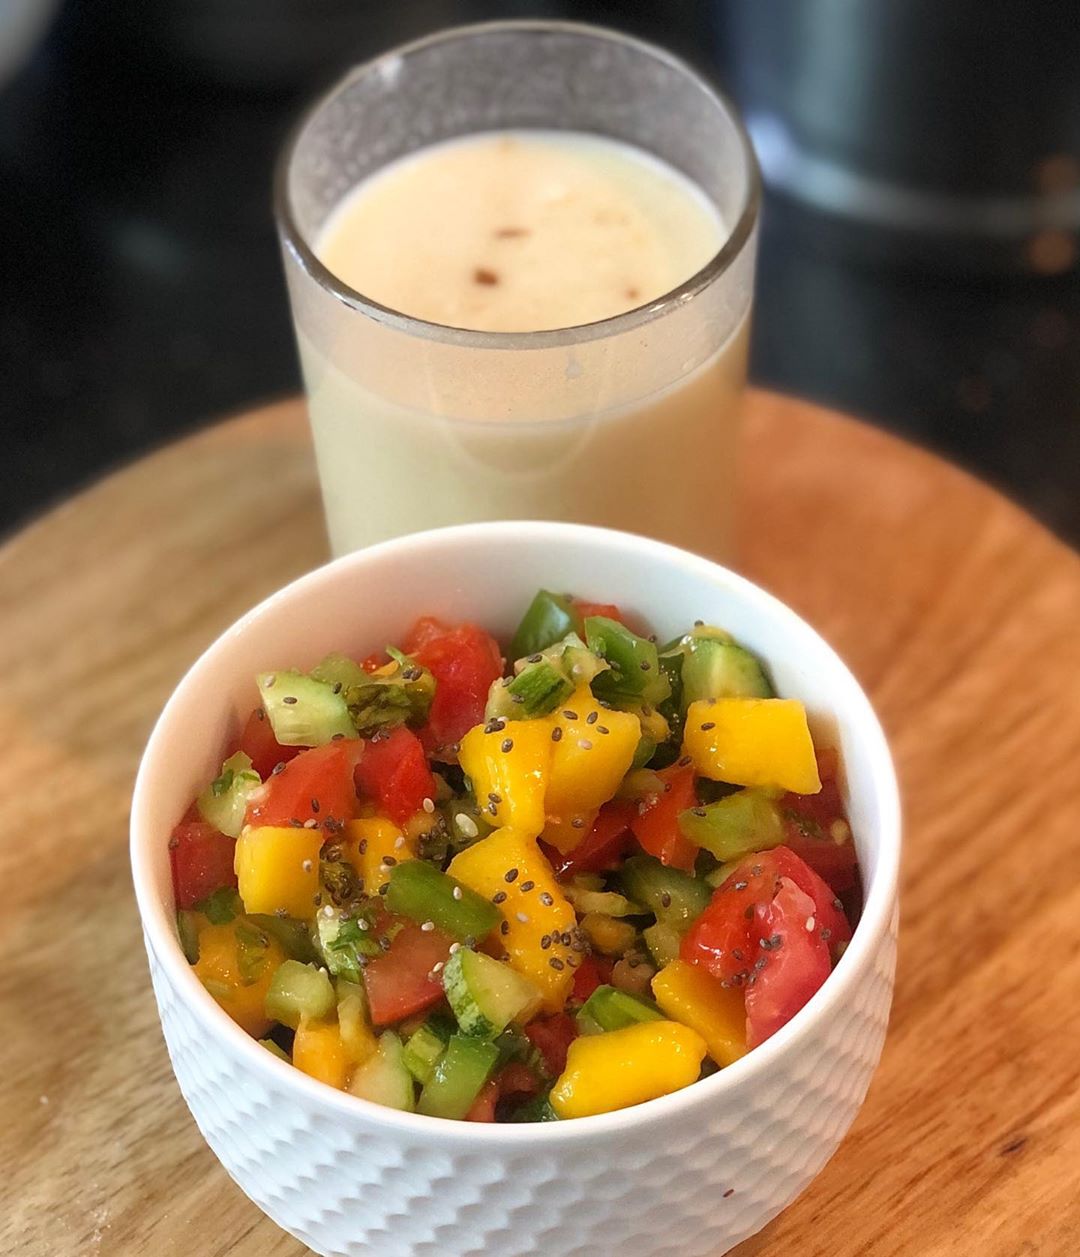 That’s what my today’s lunch is 
Mango salad with sattu buttermilk.
You all must be amazed to see this and must be thinking of is this enough 😳
Yes dear it is enough. 
My routine is like I have carbs only once and today it was lunch time where I had protein and fiber in my meal.
#kpmeals 
#mangosalad with #sattubuttermilk 
A good fiber and healthy proteins...
#lockdownmeals #quarantinelife #dietitianmeals #komalpatel